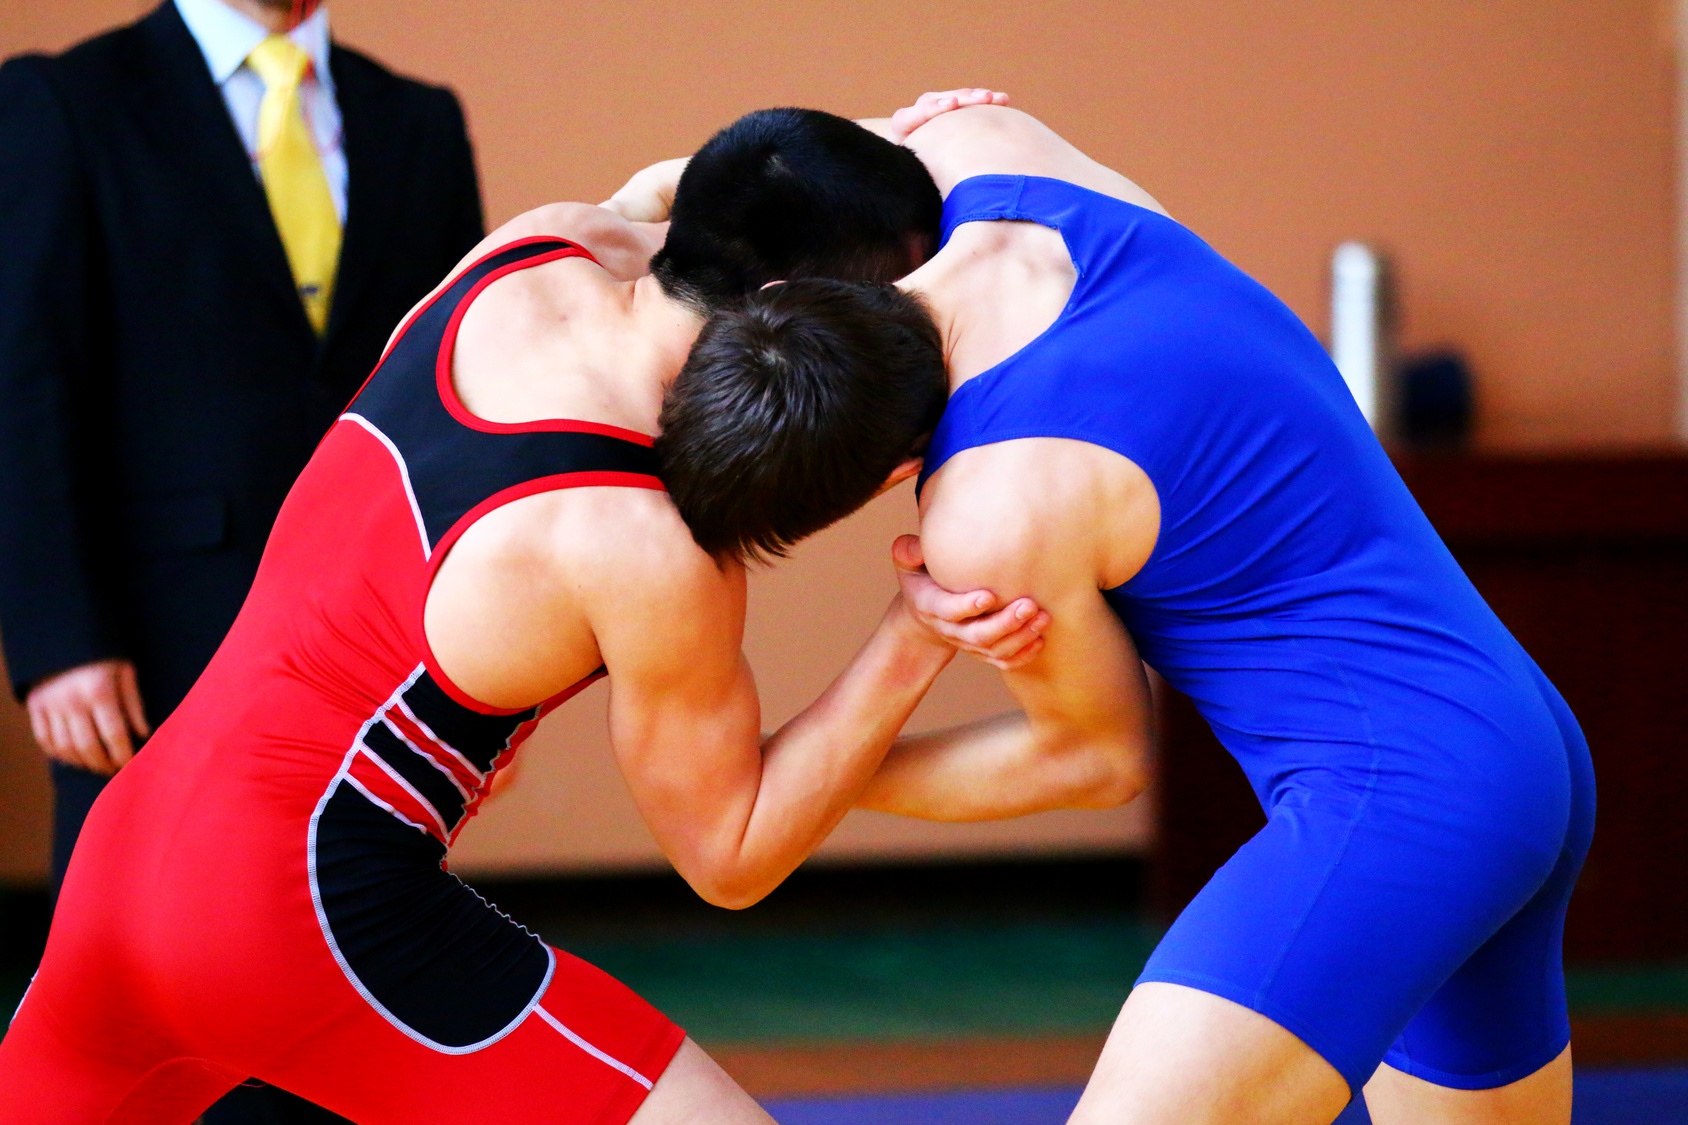 Greco-Roman wrestlers in competition